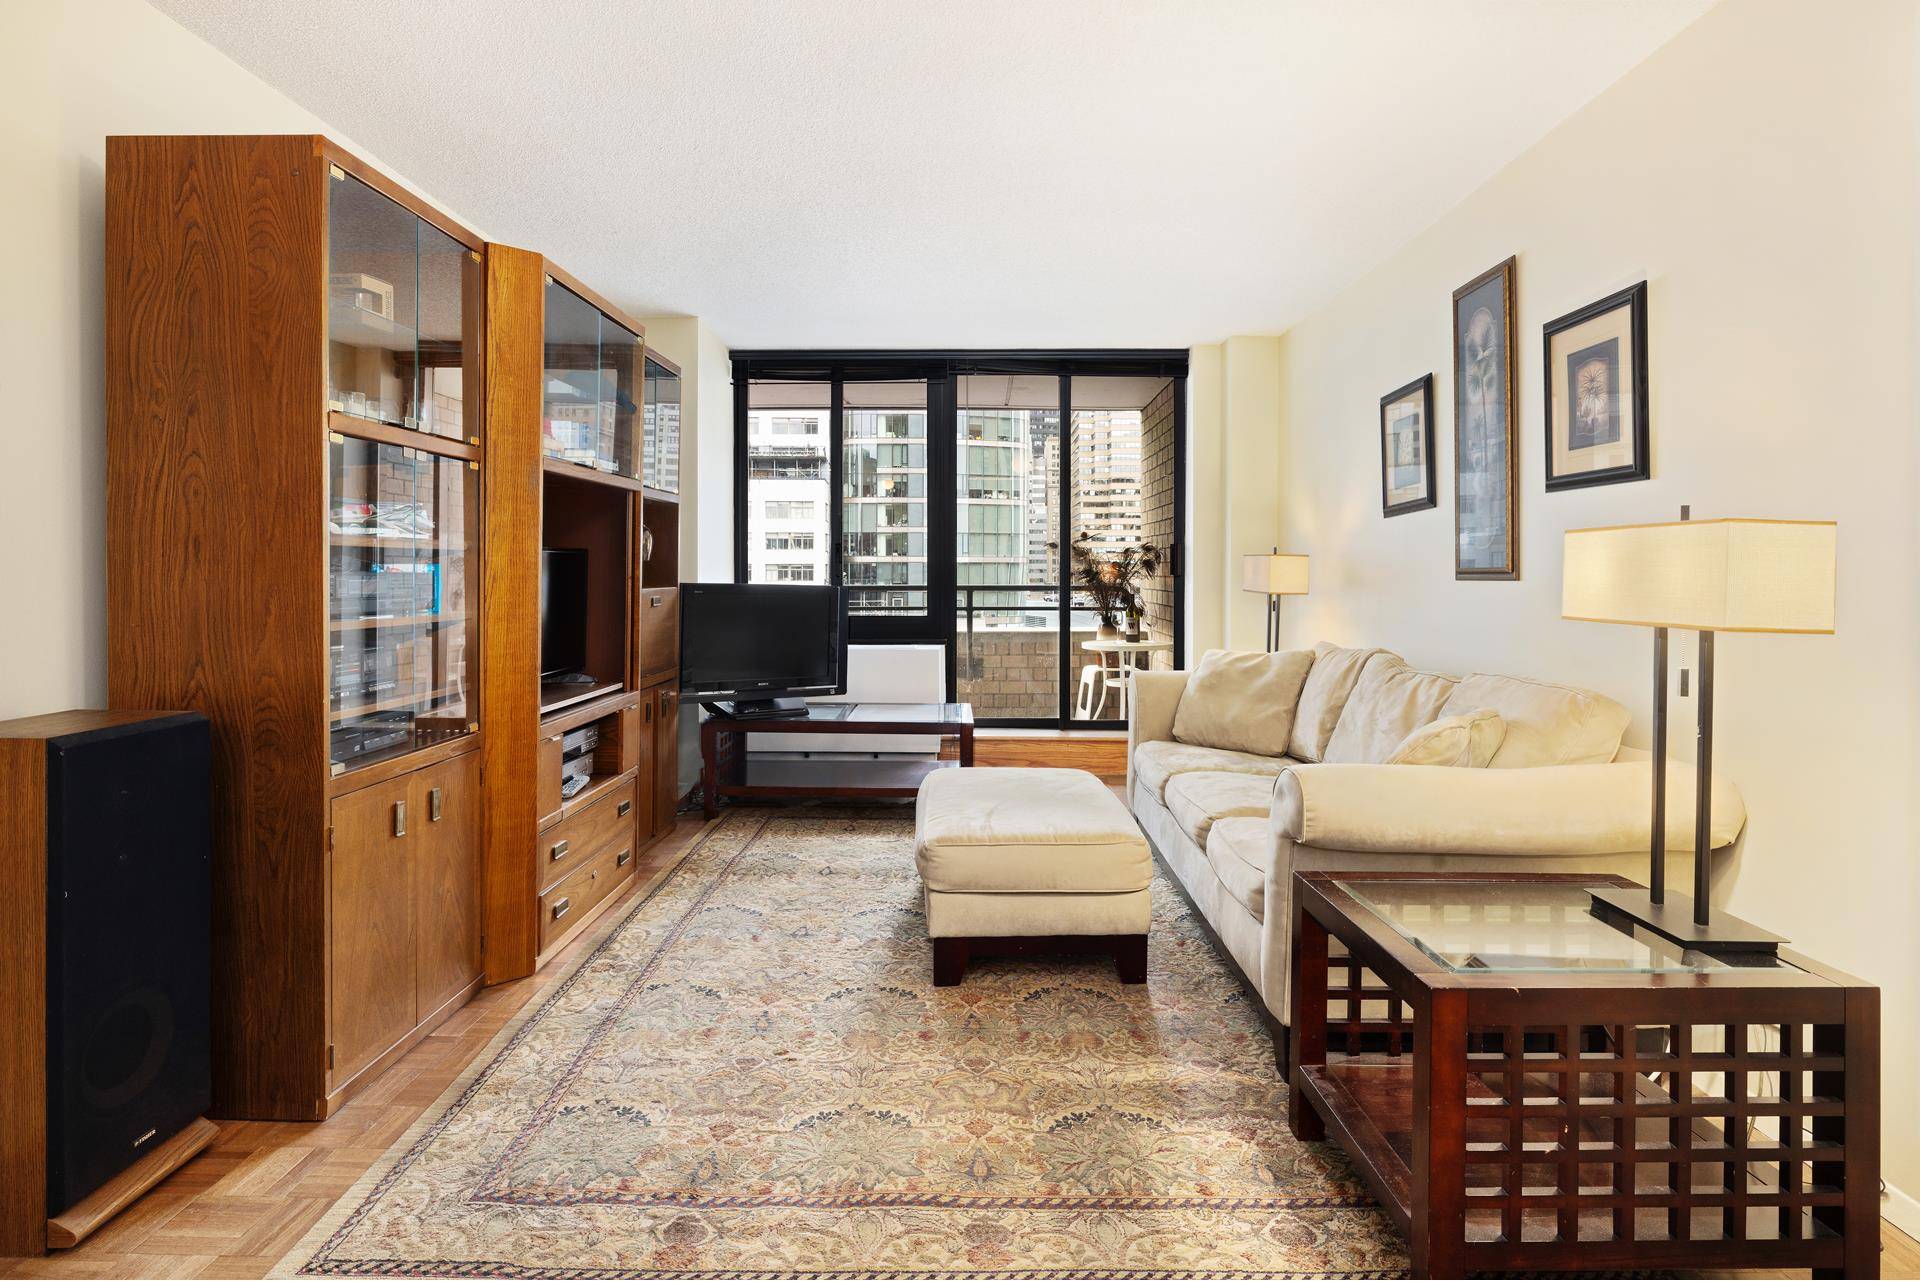 Large One bedroom in the most sought after South End Ave section of Battery Park City.